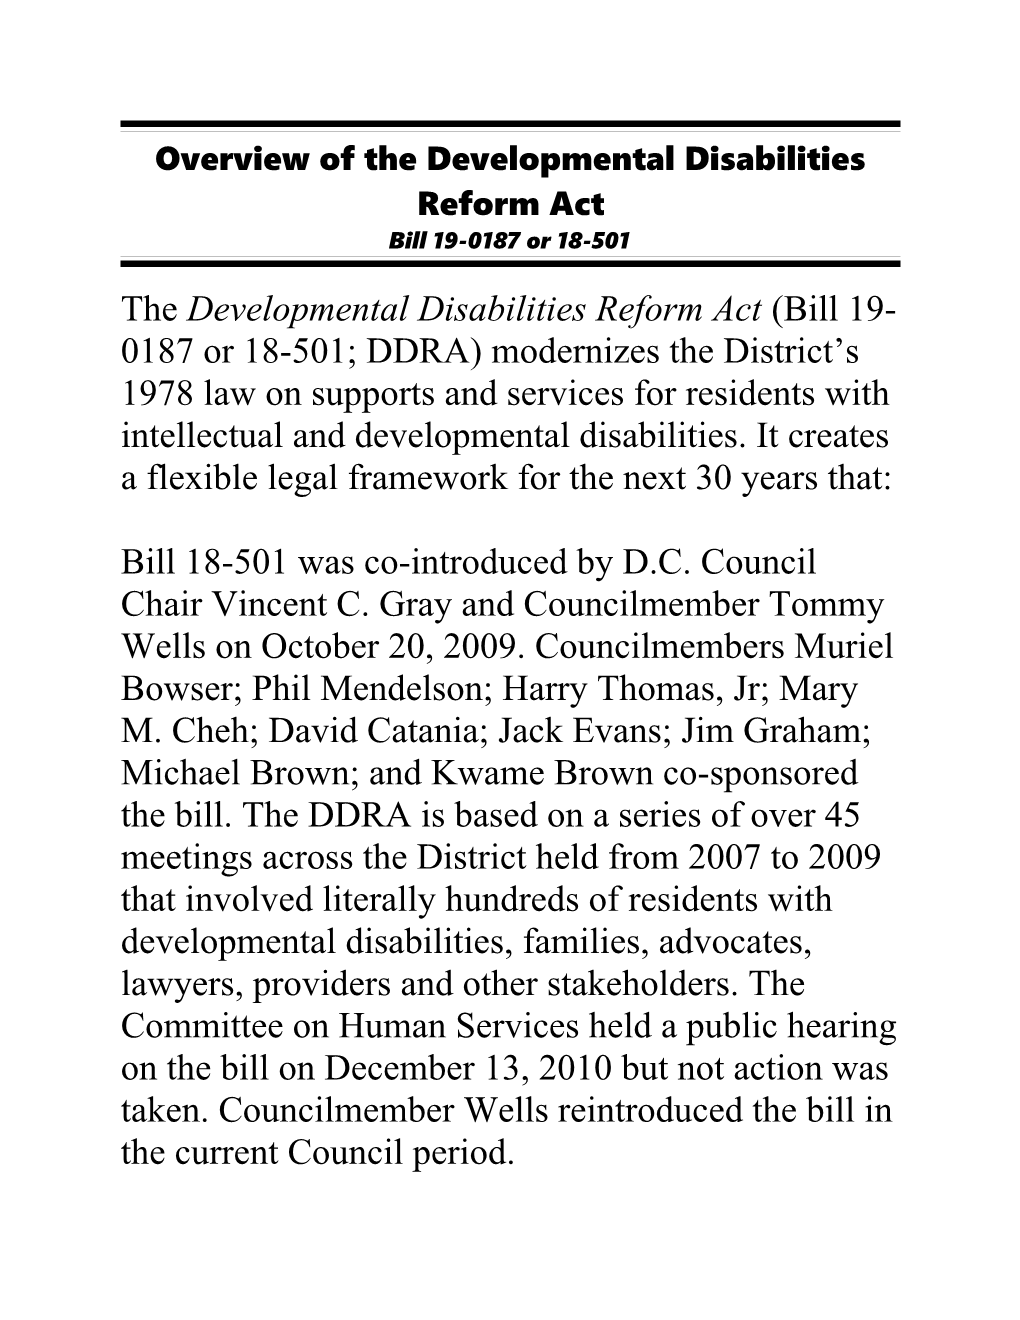 Overview of the Developmental Disabilities Reform Act